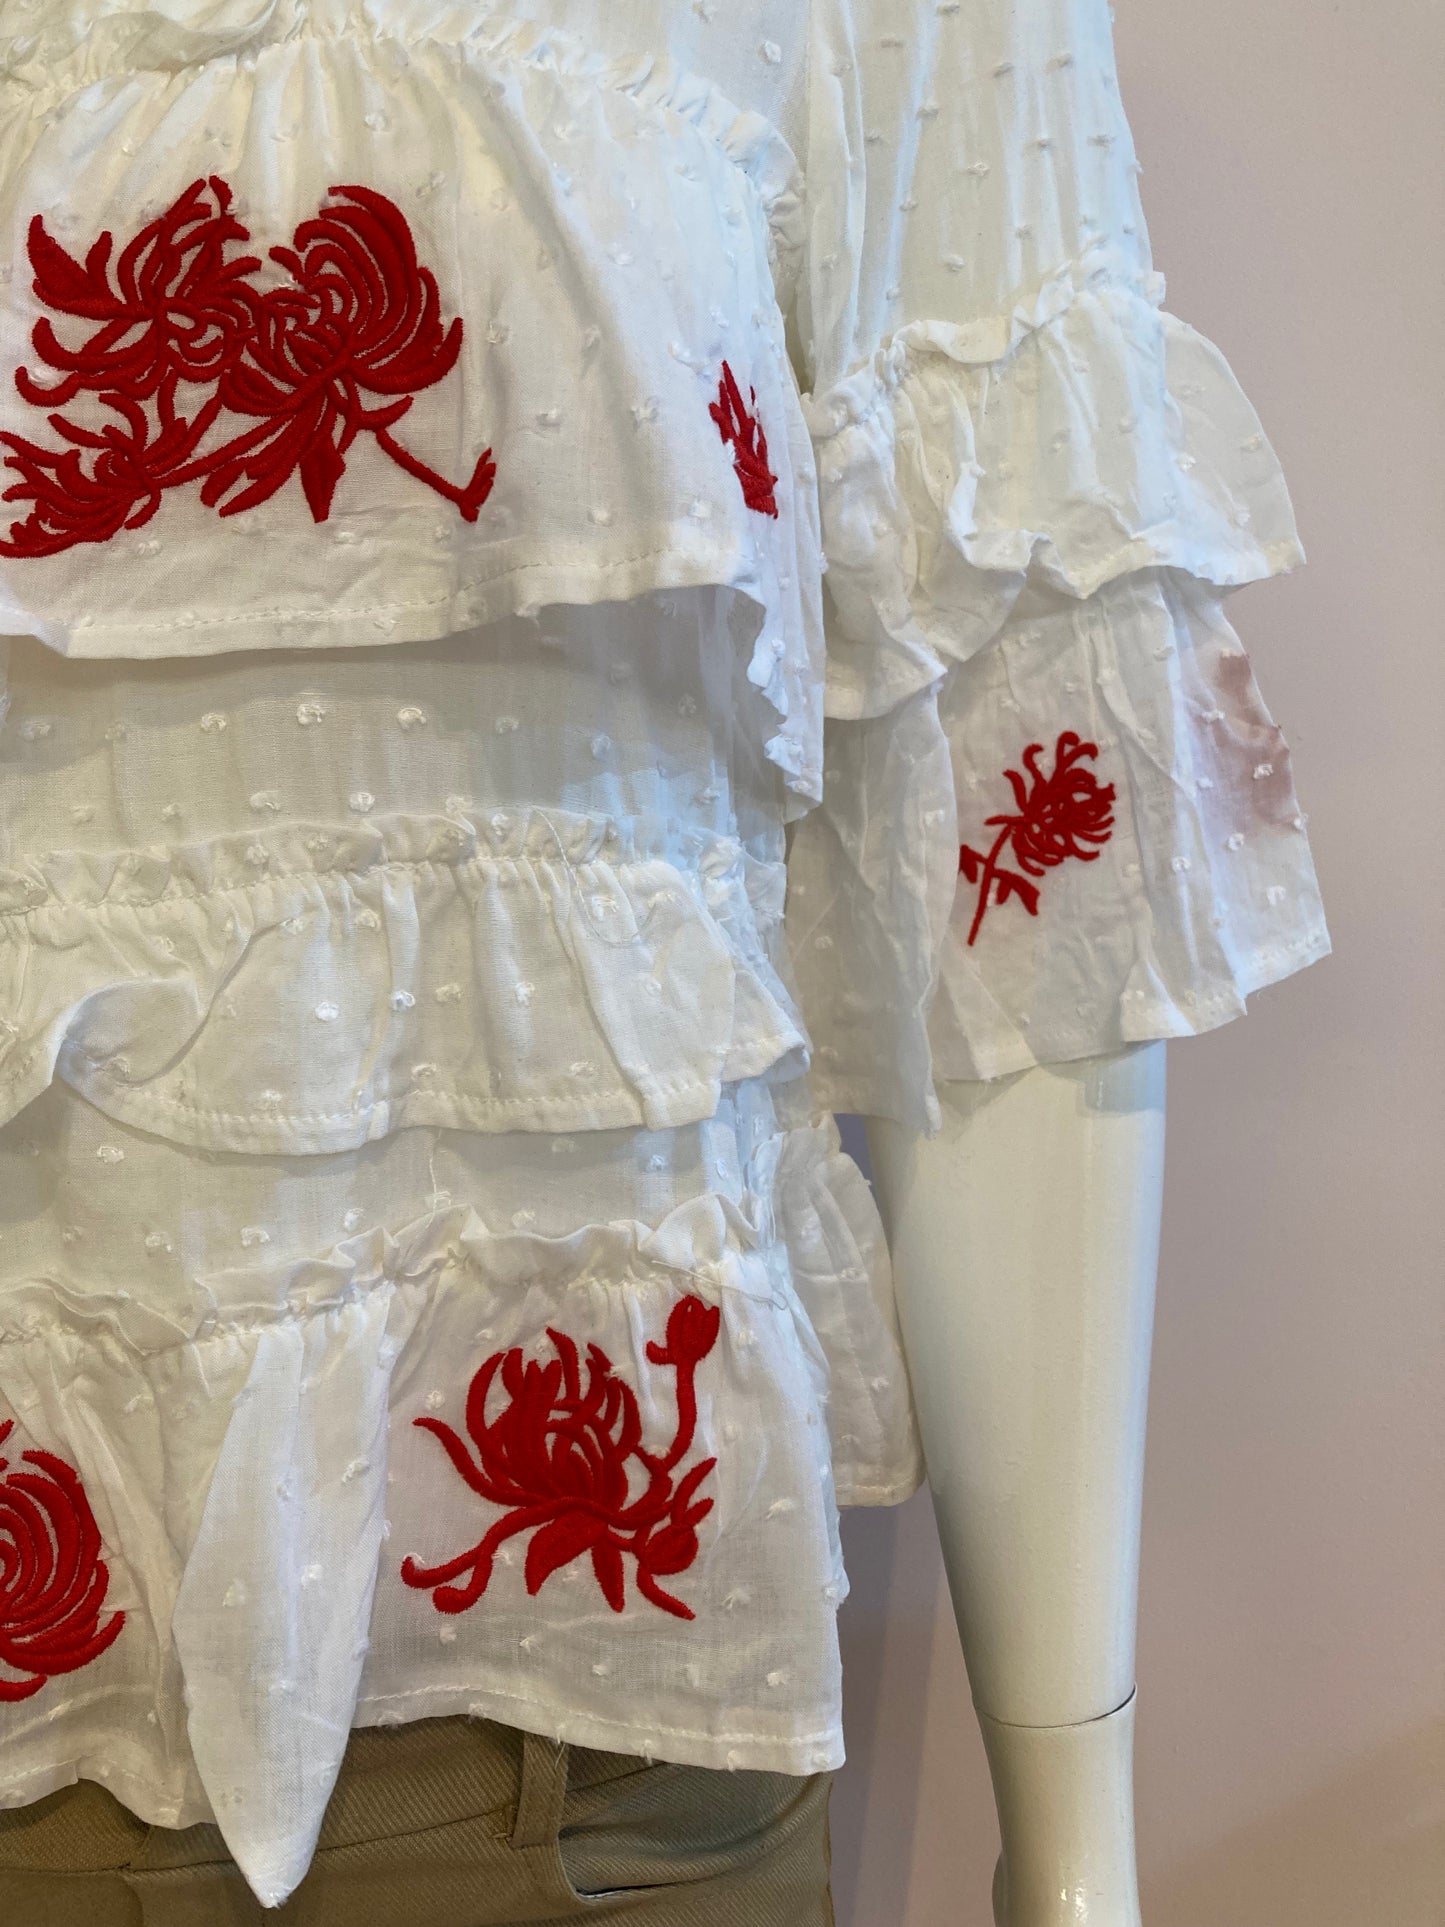 White top with ruffle and red embroidery